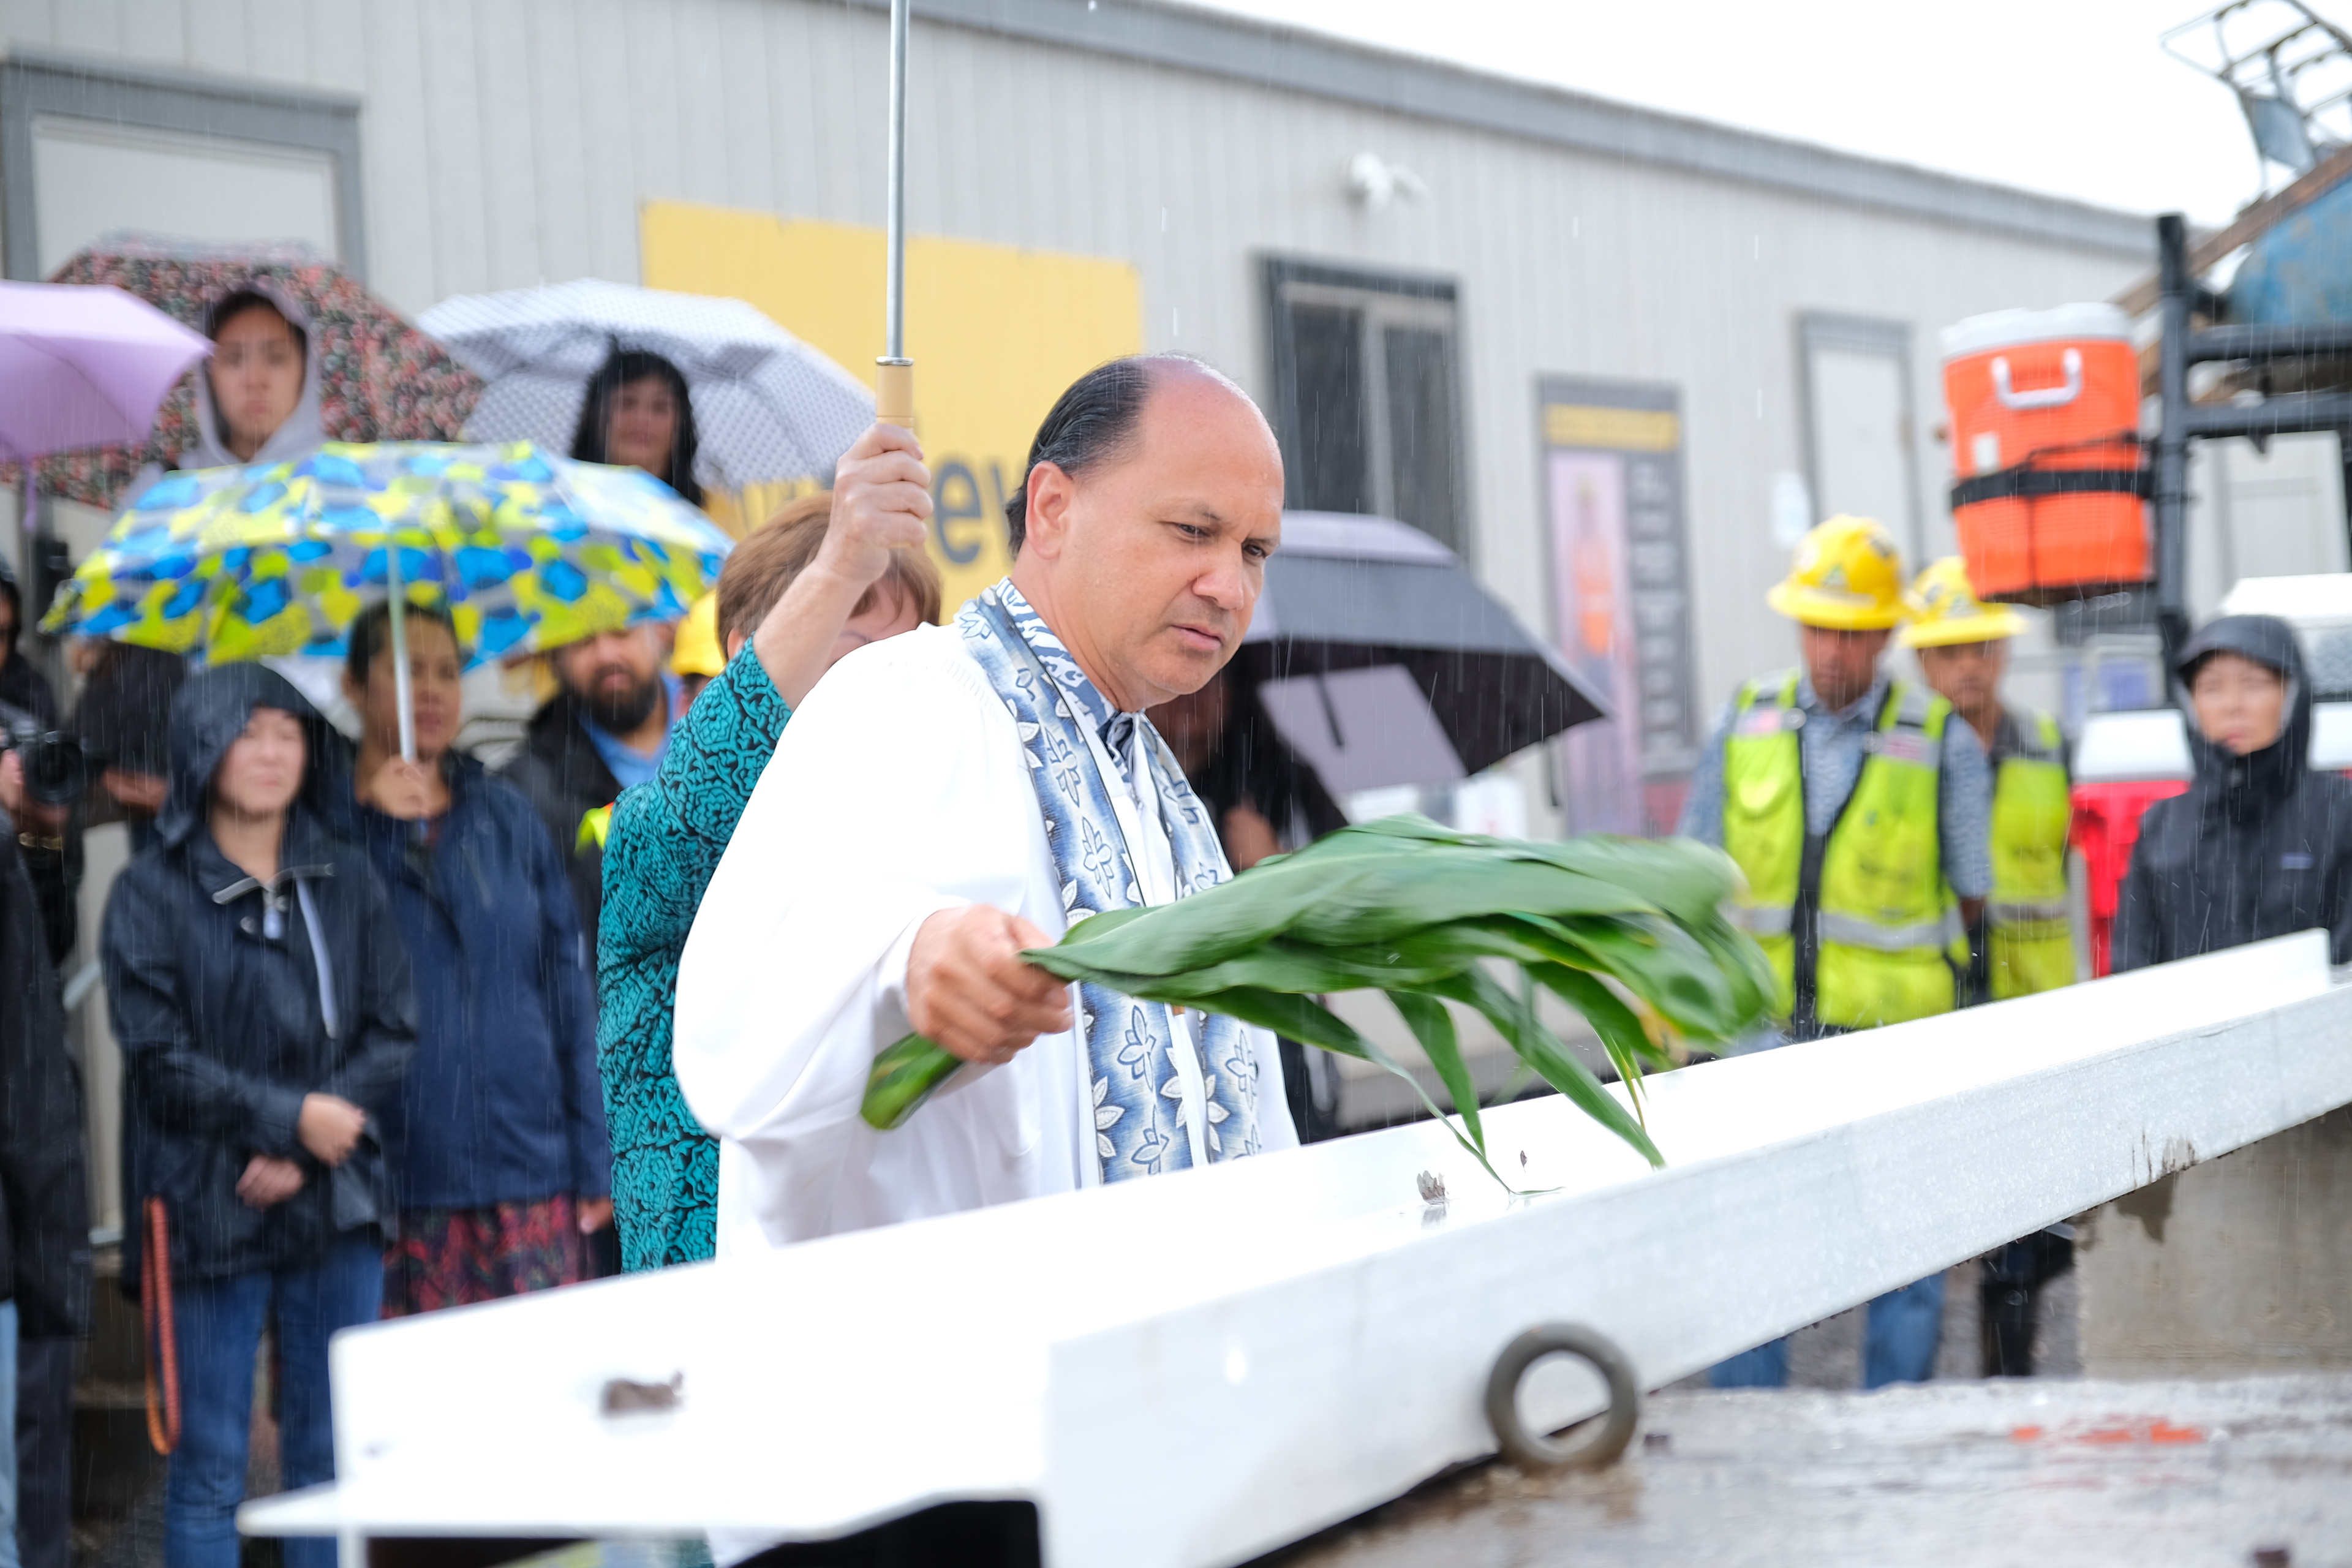 Kahu Kordell Kekoa blesses the beam by sprinkling water with a ti leaf.